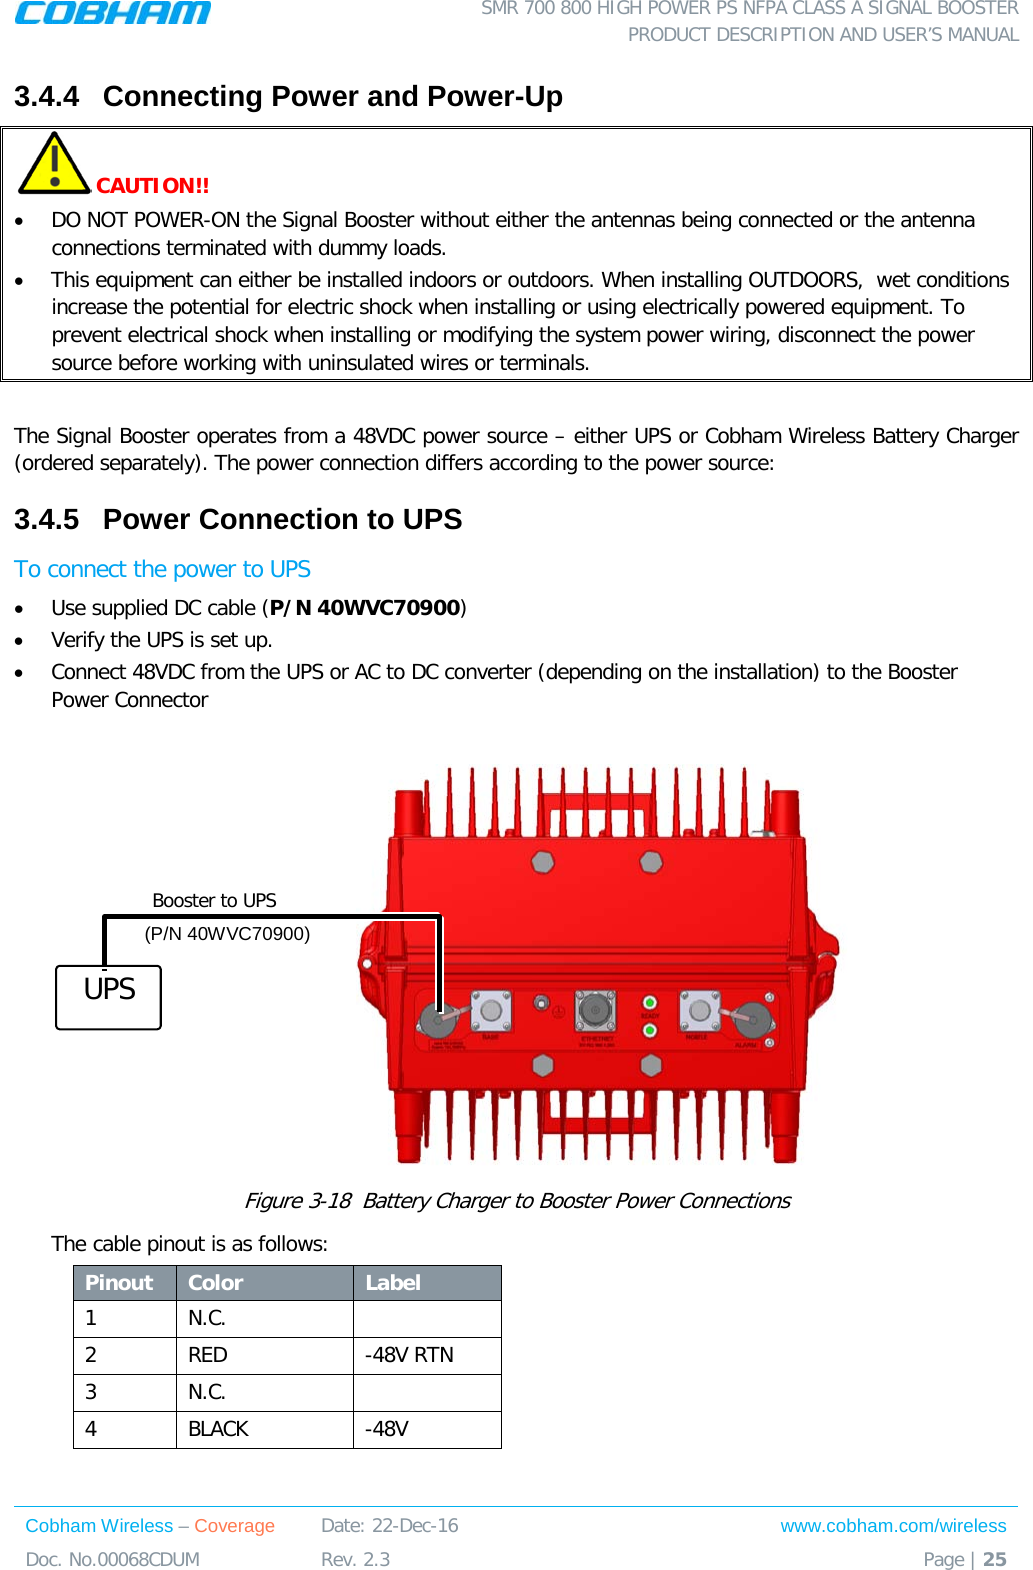  SMR 700 800 HIGH POWER PS NFPA CLASS A SIGNAL BOOSTER  PRODUCT DESCRIPTION AND USER’S MANUAL Cobham Wireless – Coverage Date: 22-Dec-16 www.cobham.com/wireless Doc. No.00068CDUM  Rev. 2.3  Page | 25  3.4.4  Connecting Power and Power-Up  CAUTION!! • DO NOT POWER-ON the Signal Booster without either the antennas being connected or the antenna connections terminated with dummy loads.  • This equipment can either be installed indoors or outdoors. When installing OUTDOORS,  wet conditions increase the potential for electric shock when installing or using electrically powered equipment. To prevent electrical shock when installing or modifying the system power wiring, disconnect the power source before working with uninsulated wires or terminals.  The Signal Booster operates from a 48VDC power source – either UPS or Cobham Wireless Battery Charger (ordered separately). The power connection differs according to the power source: 3.4.5  Power Connection to UPS To connect the power to UPS • Use supplied DC cable (P/N 40WVC70900) • Verify the UPS is set up. • Connect 48VDC from the UPS or AC to DC converter (depending on the installation) to the Booster Power Connector                                 Figure  3-18  Battery Charger to Booster Power Connections The cable pinout is as follows: Pinout Color Label 1  N.C.   2  RED   -48V RTN 3  N.C.   4  BLACK   -48V  UPS Booster to UPS (P/N 40WVC70900) 